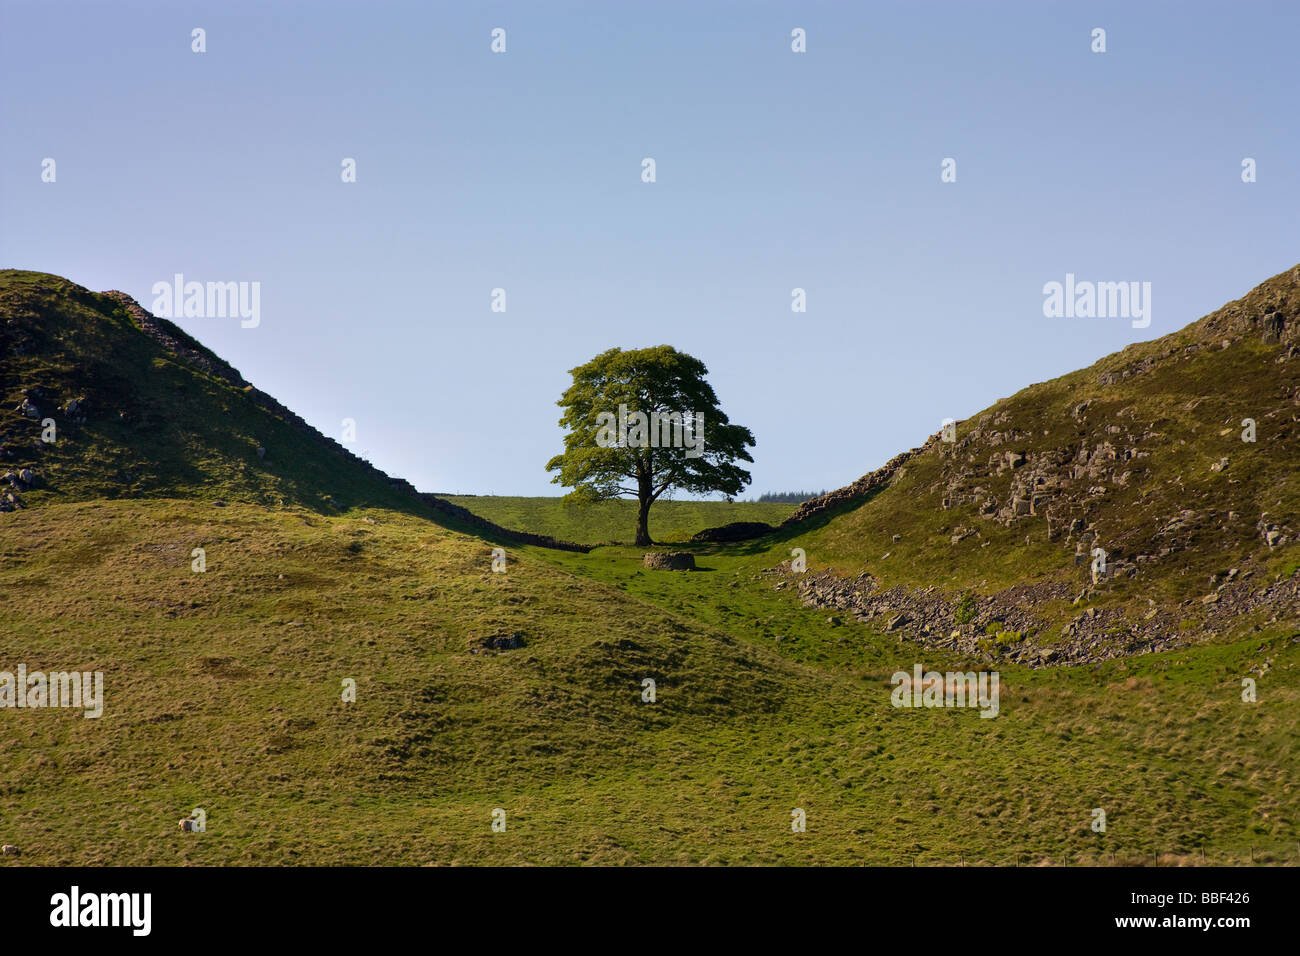 Sycamore Gap Hadrians Roman Wall, Northumberland. Also known as Kevins Tree from the movie Robin Hood Prince of Theives Stock Photo